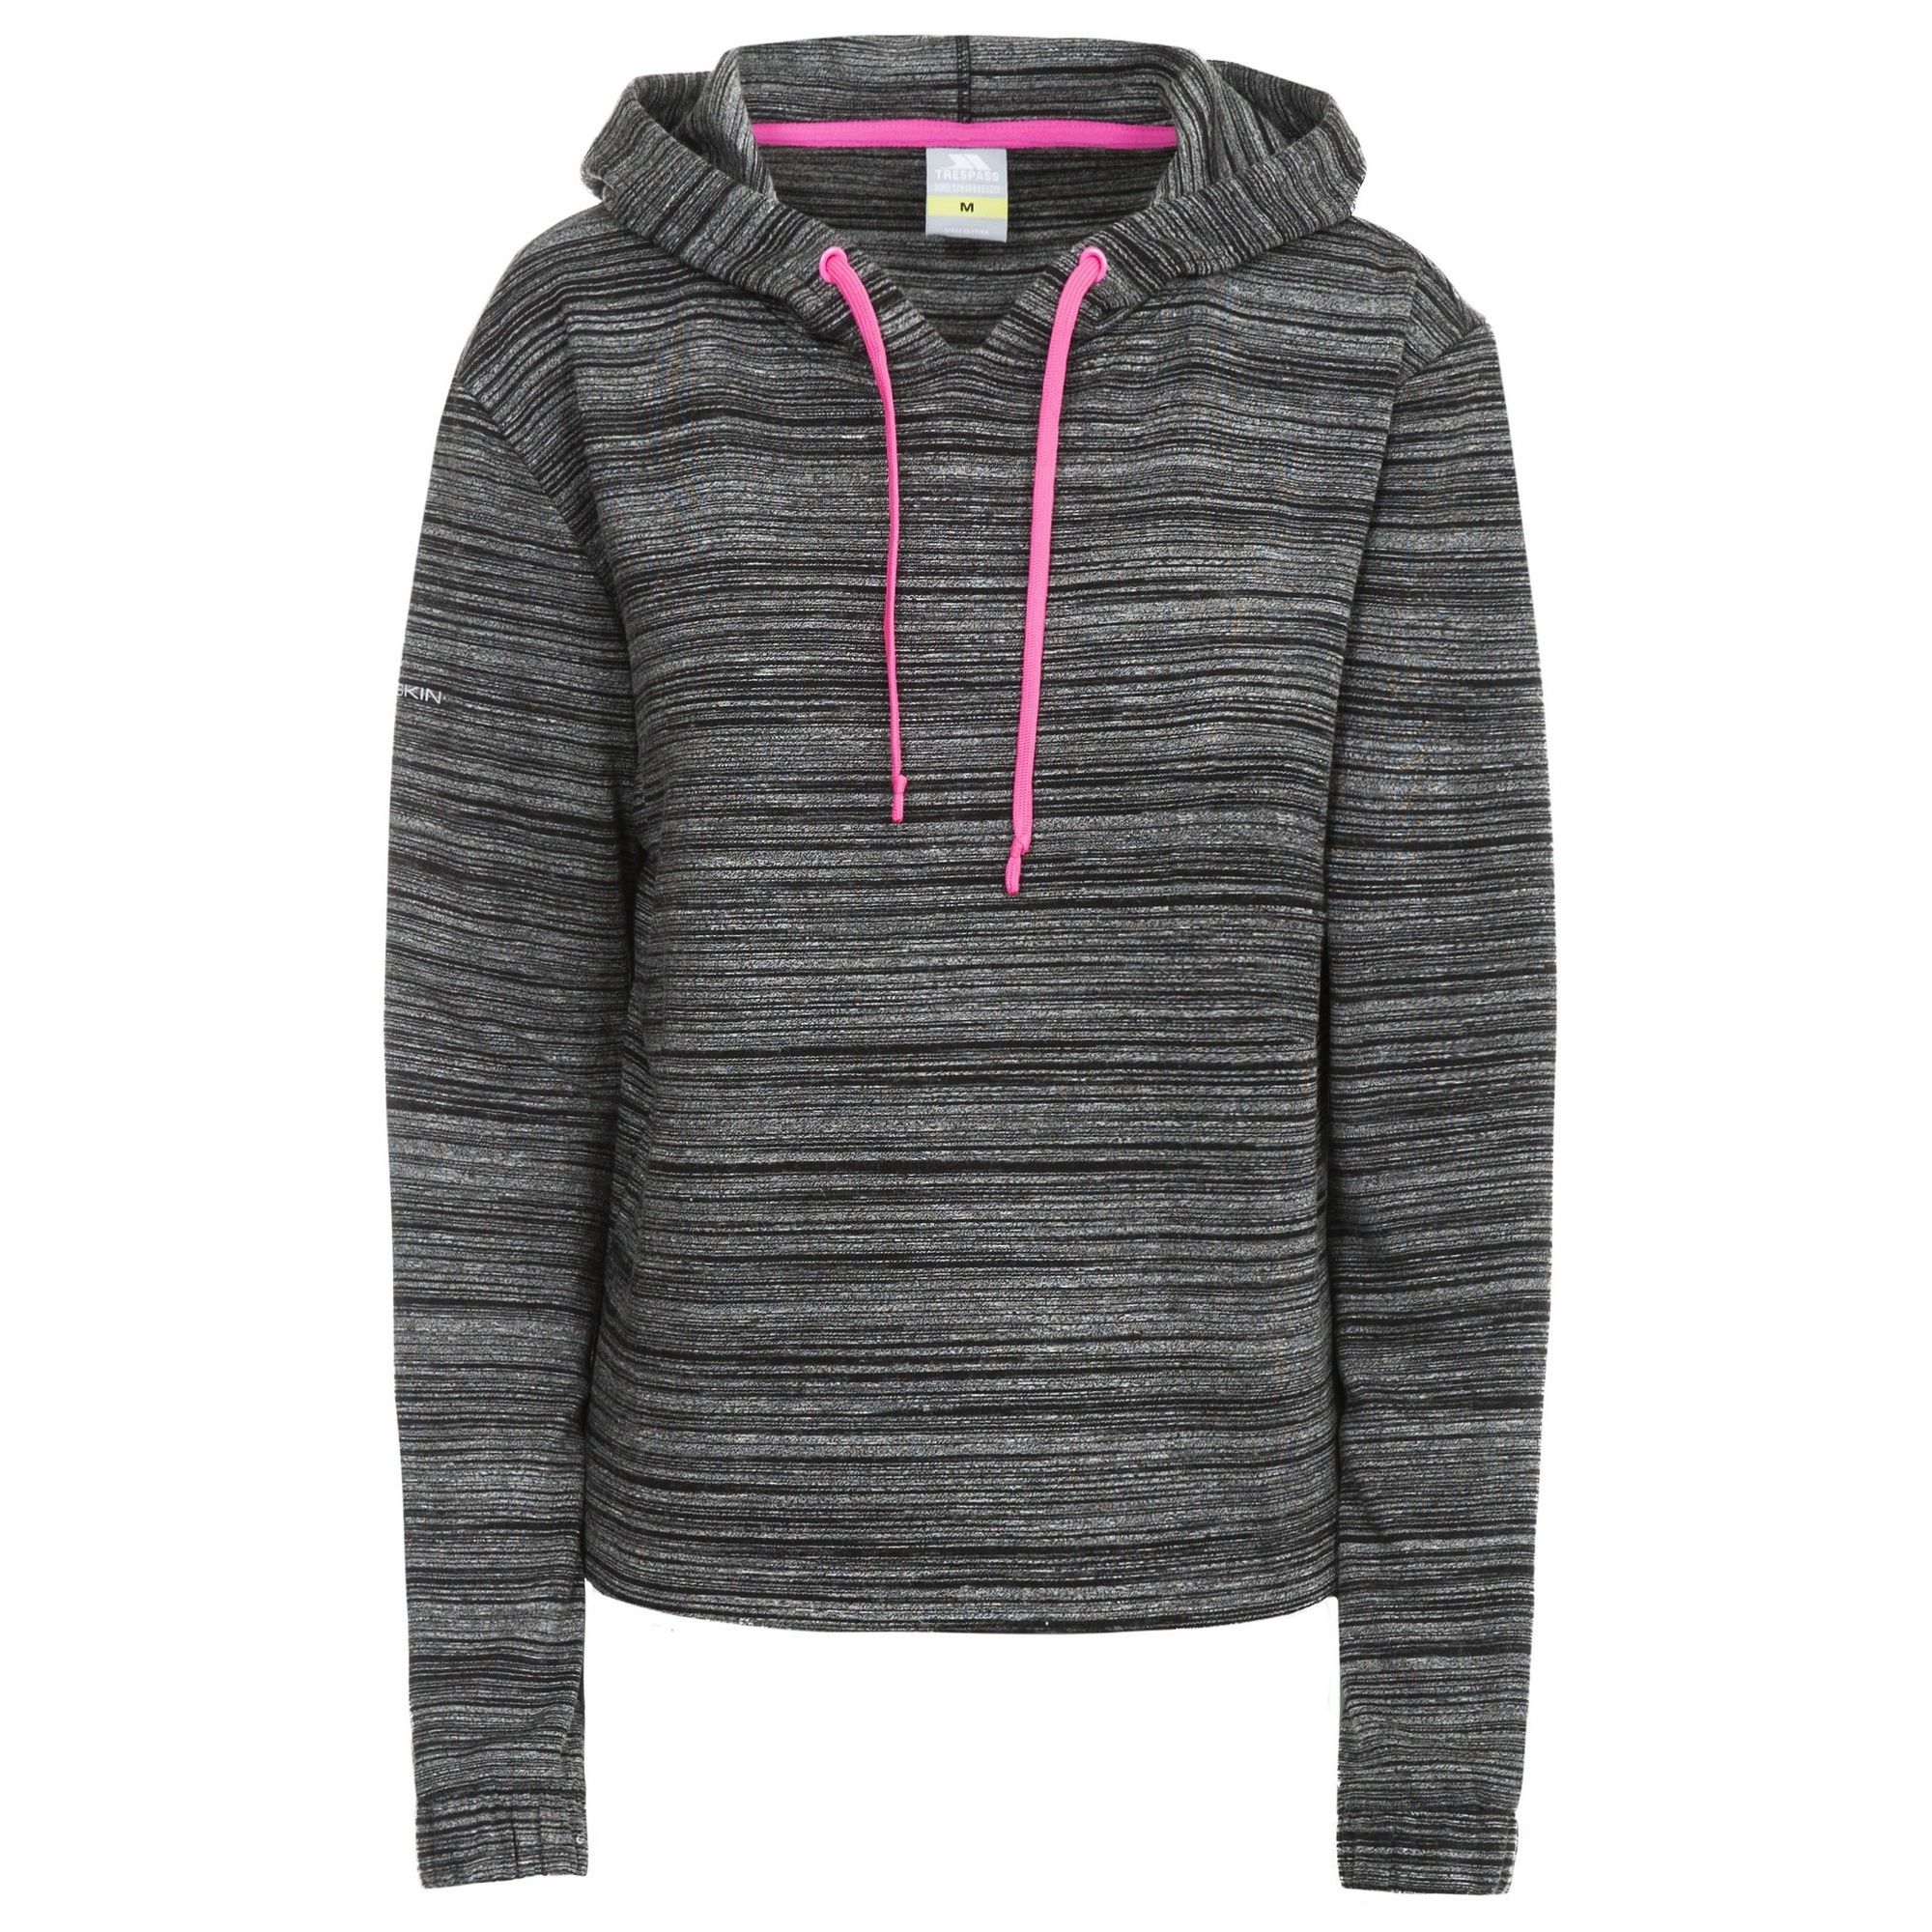 Active hooded top. Grown on adjustable hood. Elasticated cuffs. Relaxed fit. Reflective printed logos. Wicking. Quick dry. 79% viscose, 21% polyester. Trespass Womens Chest Sizing (approx): XS/8 - 32in/81cm, S/10 - 34in/86cm, M/12 - 36in/91.4cm, L/14 - 38in/96.5cm, XL/16 - 40in/101.5cm, XXL/18 - 42in/106.5cm.